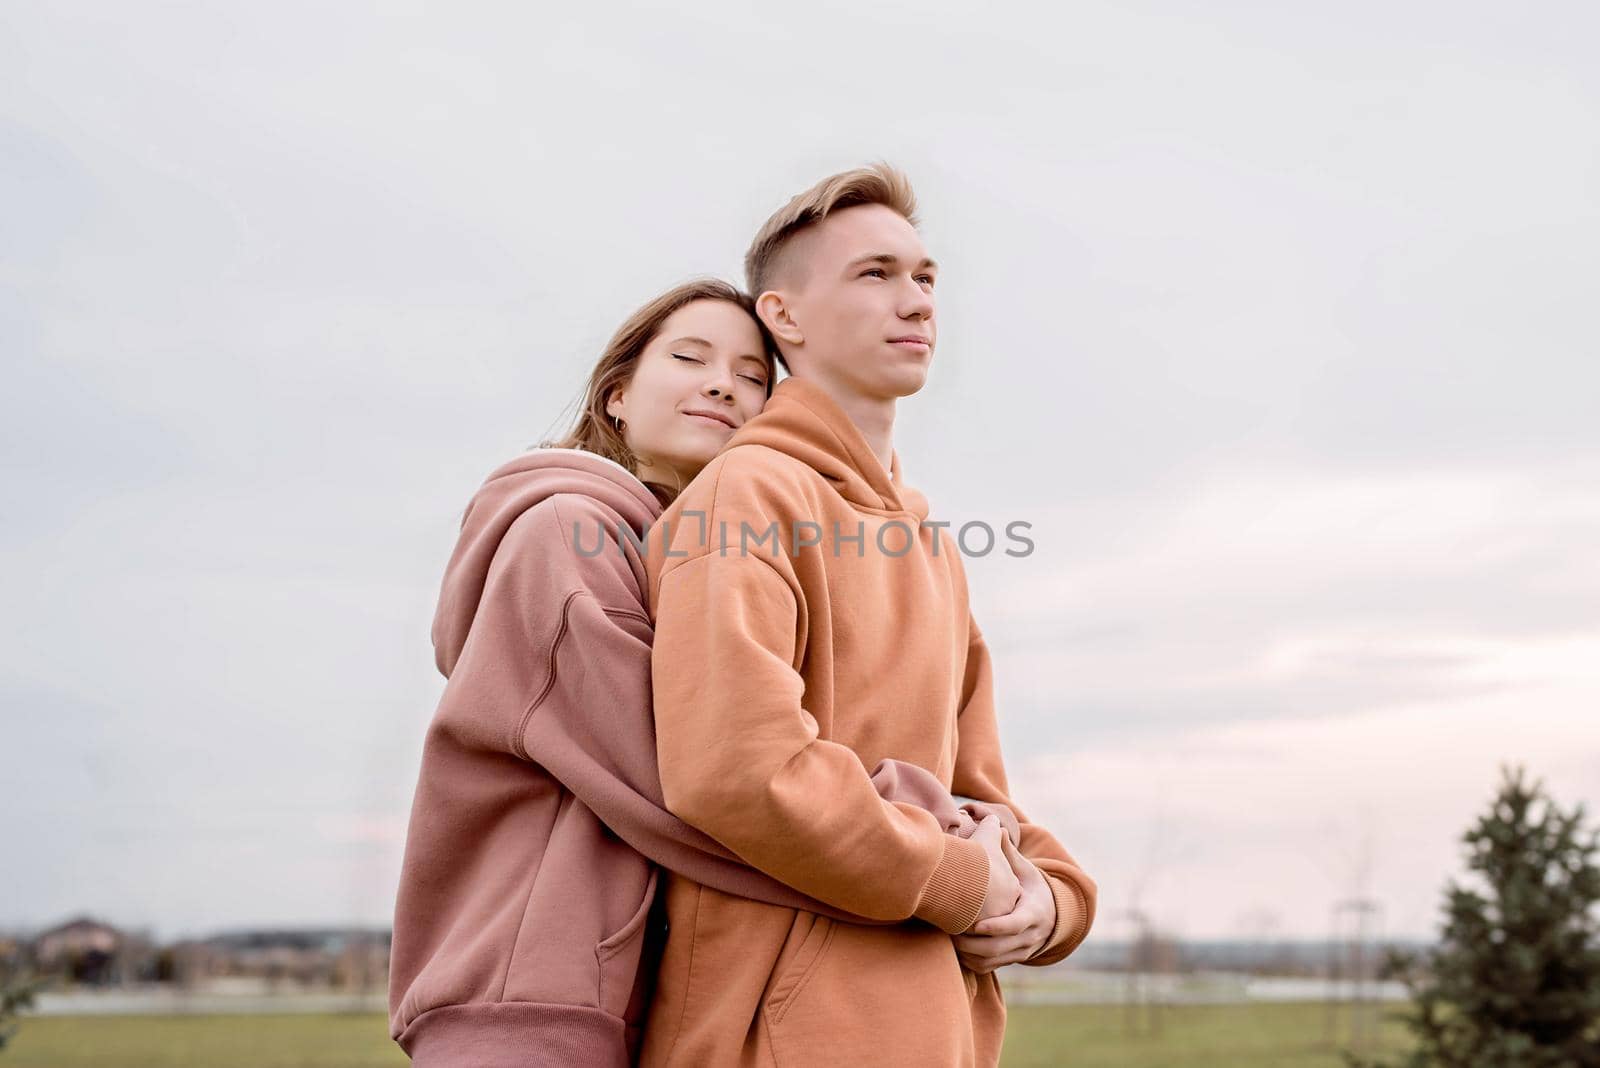 Happy young loving couple embracing each other outdoors in the park